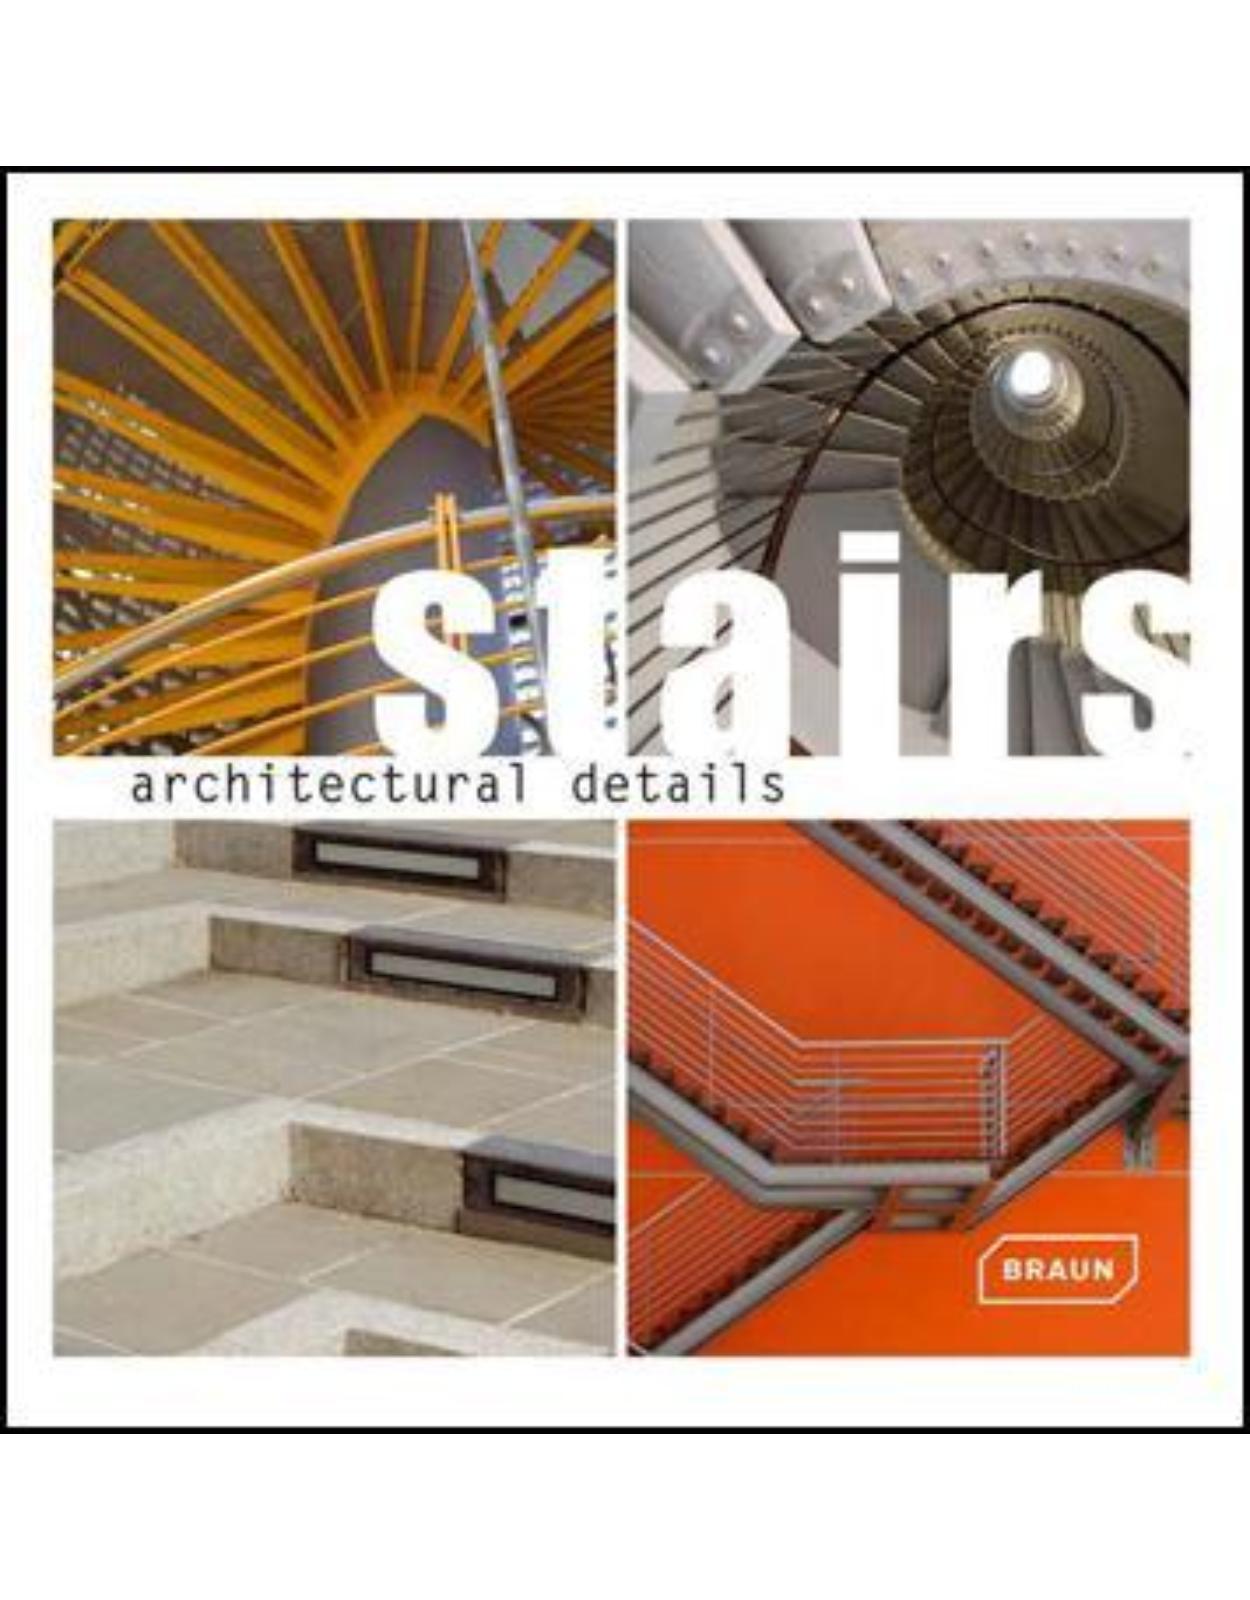 Stairs (Architectural Details)